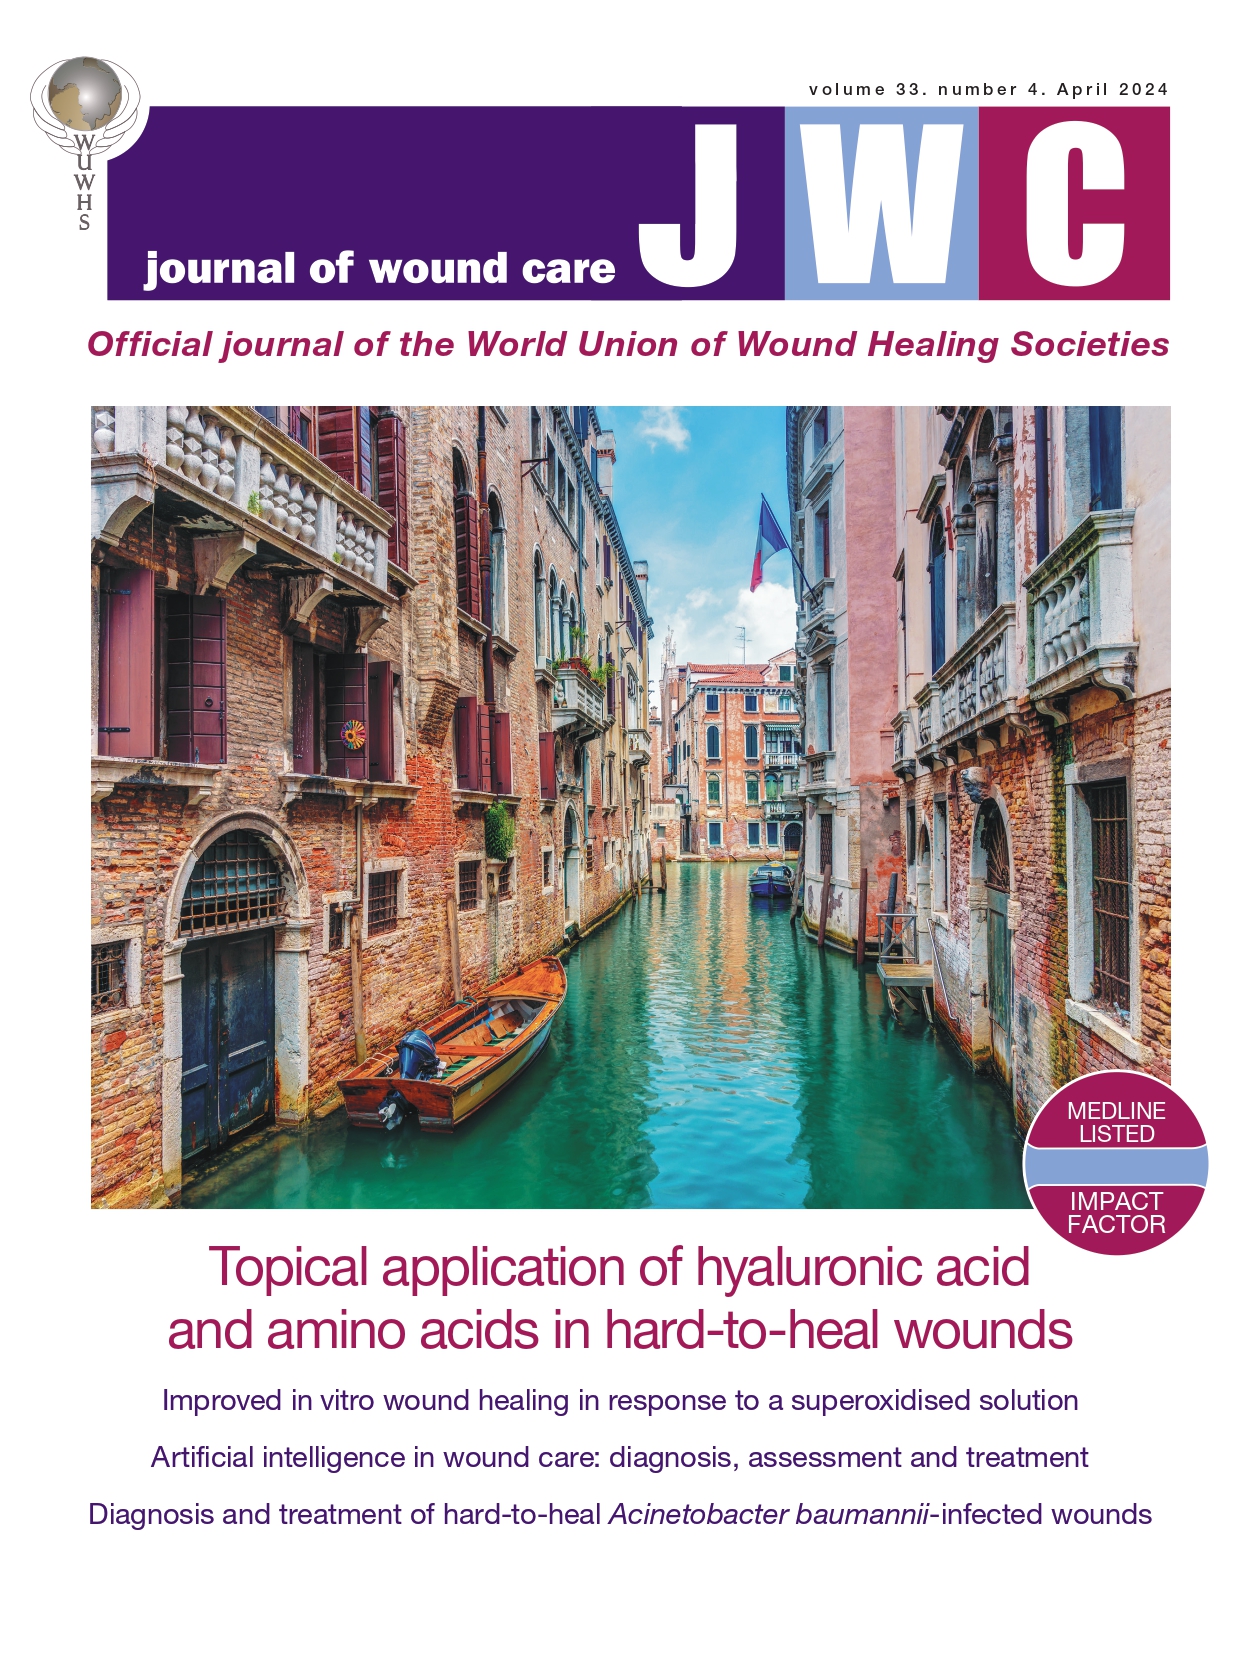 Journal of Wound Care